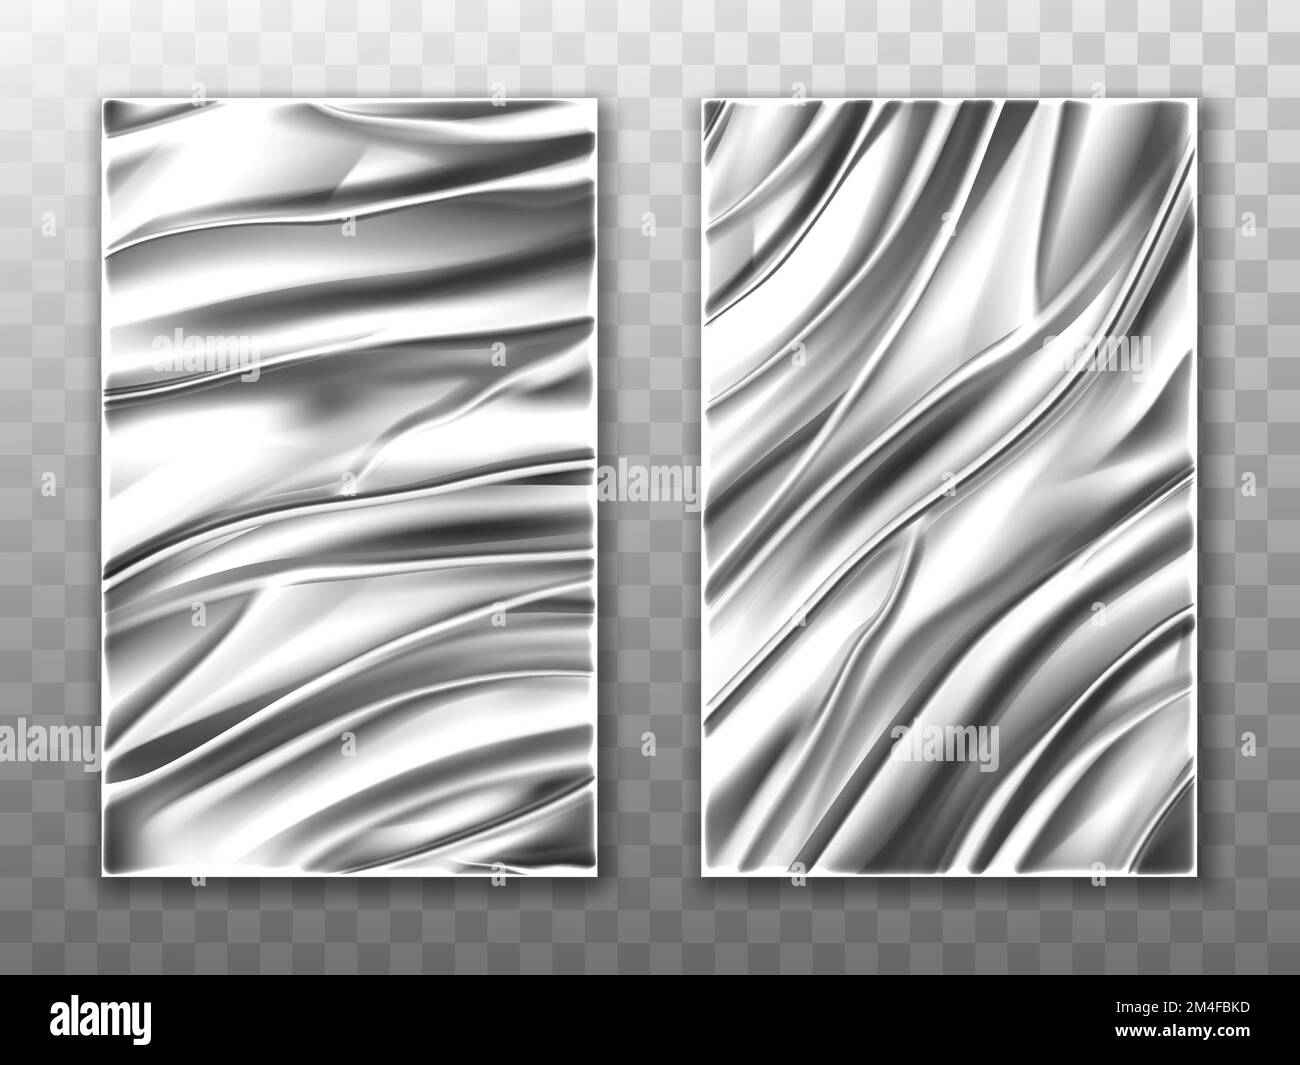 Silver foil crumpled metal texture background, aluminum or steel folded curtain, wrapping paper sheets, wrinkled fabric or plastic shiny material or silk cloth, Realistic 3d vector tinfoil mockup Stock Vector